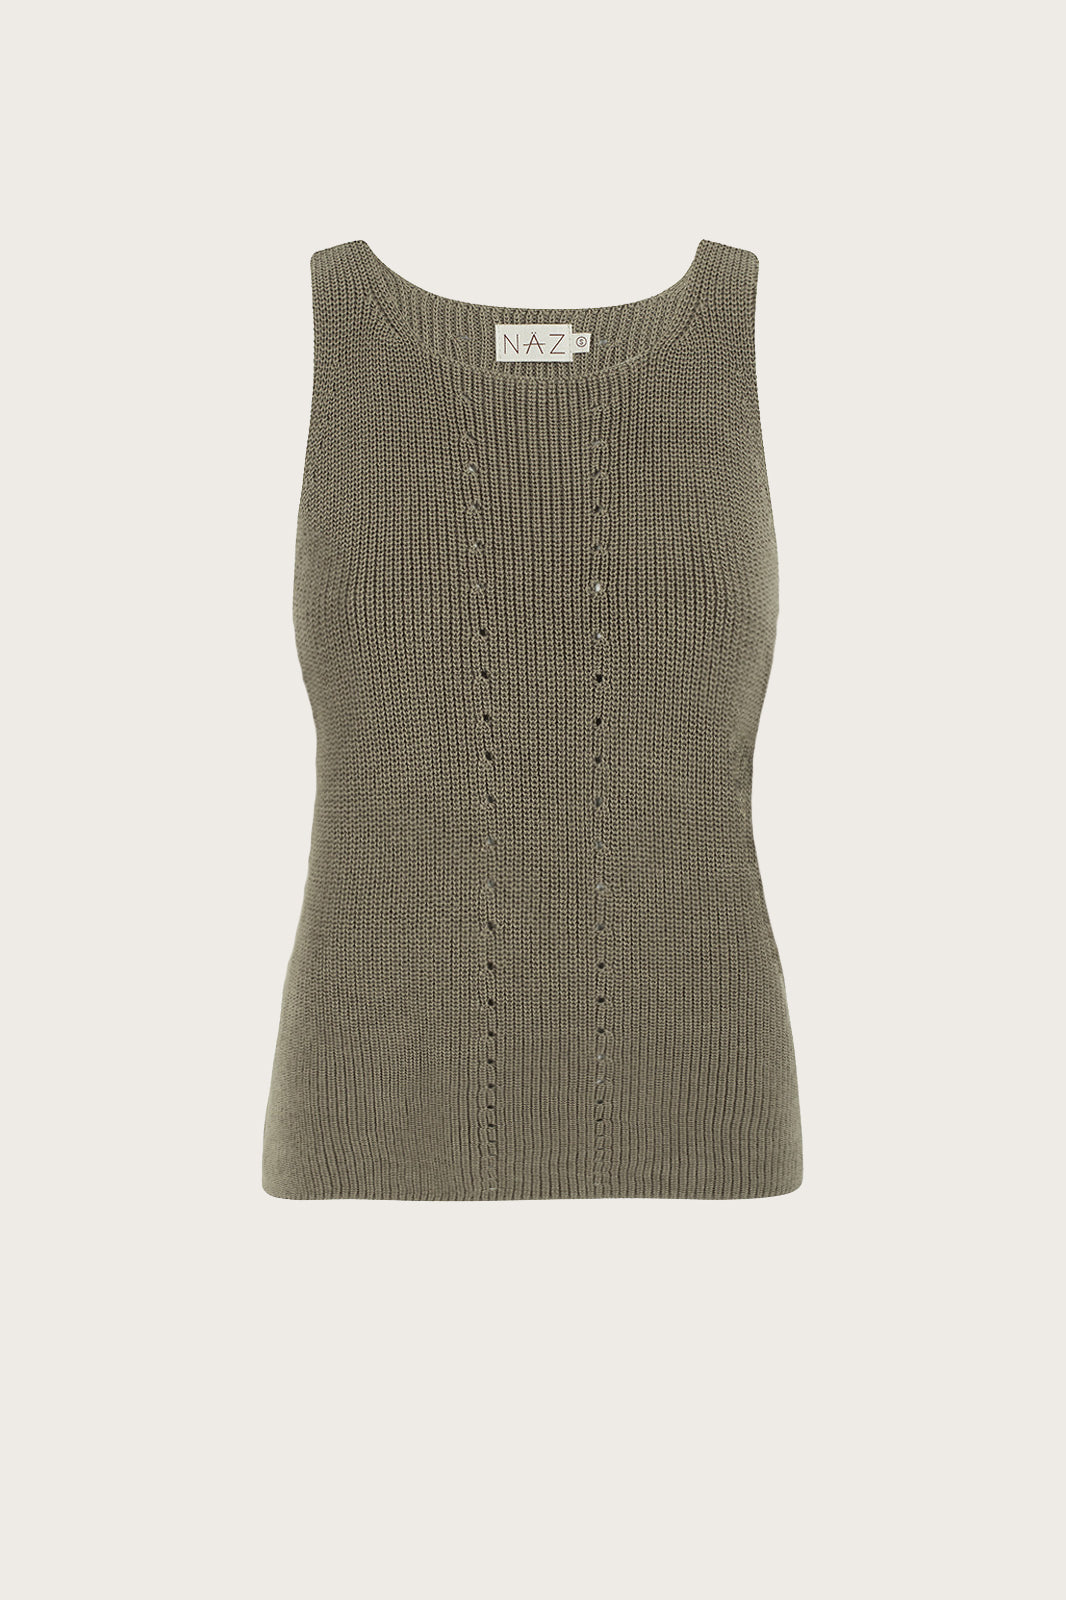 Naz women's summer knit top. Made in Portugal from a blend of recycled and conventional cotton.